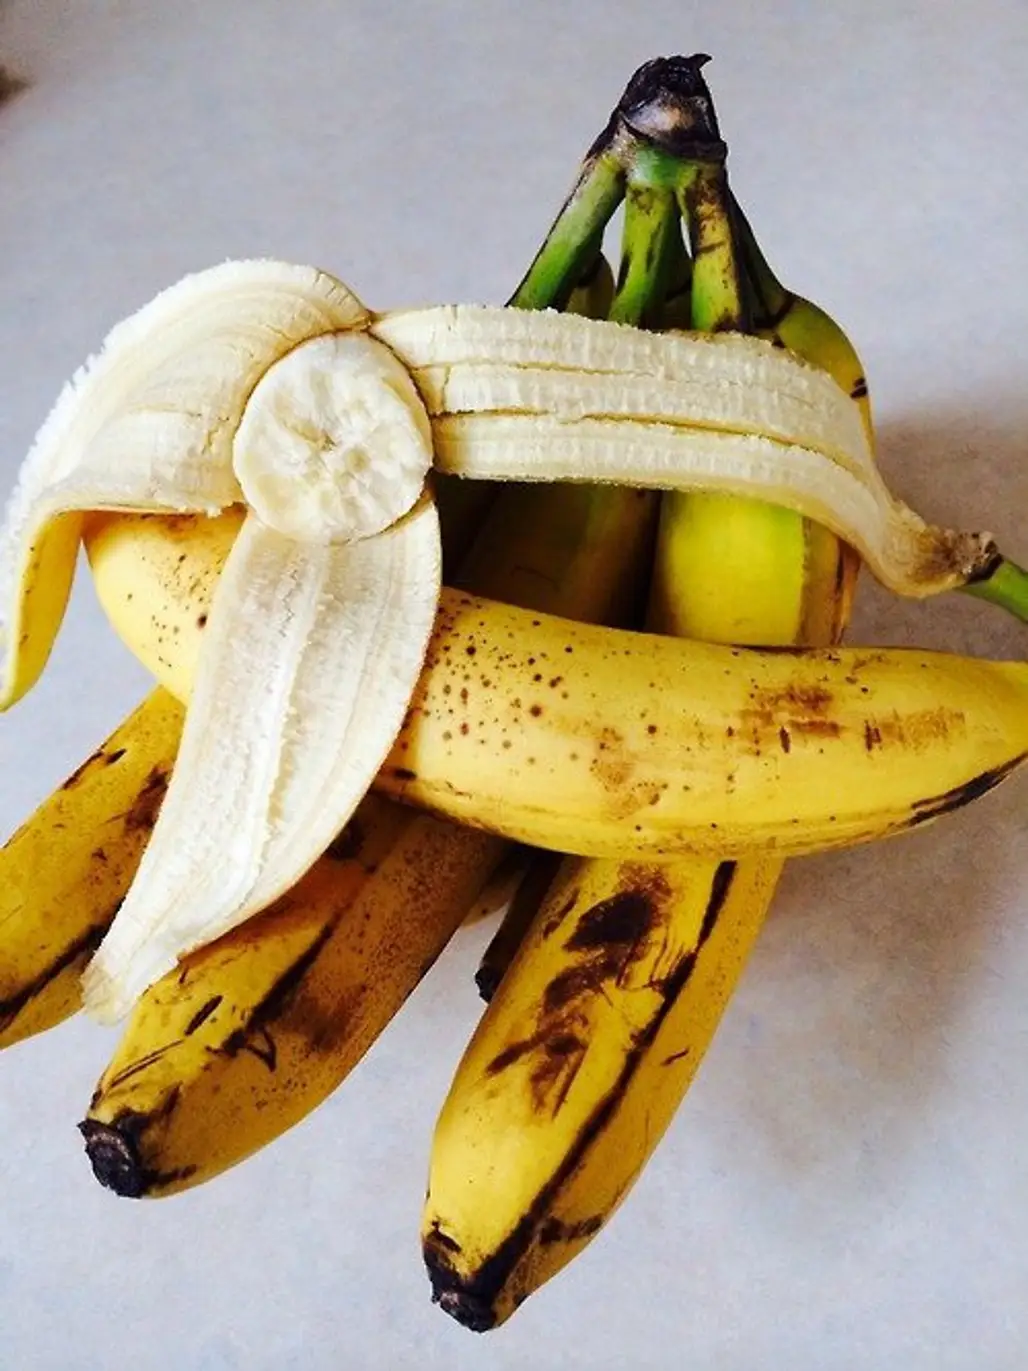 Bananas to Control Weight